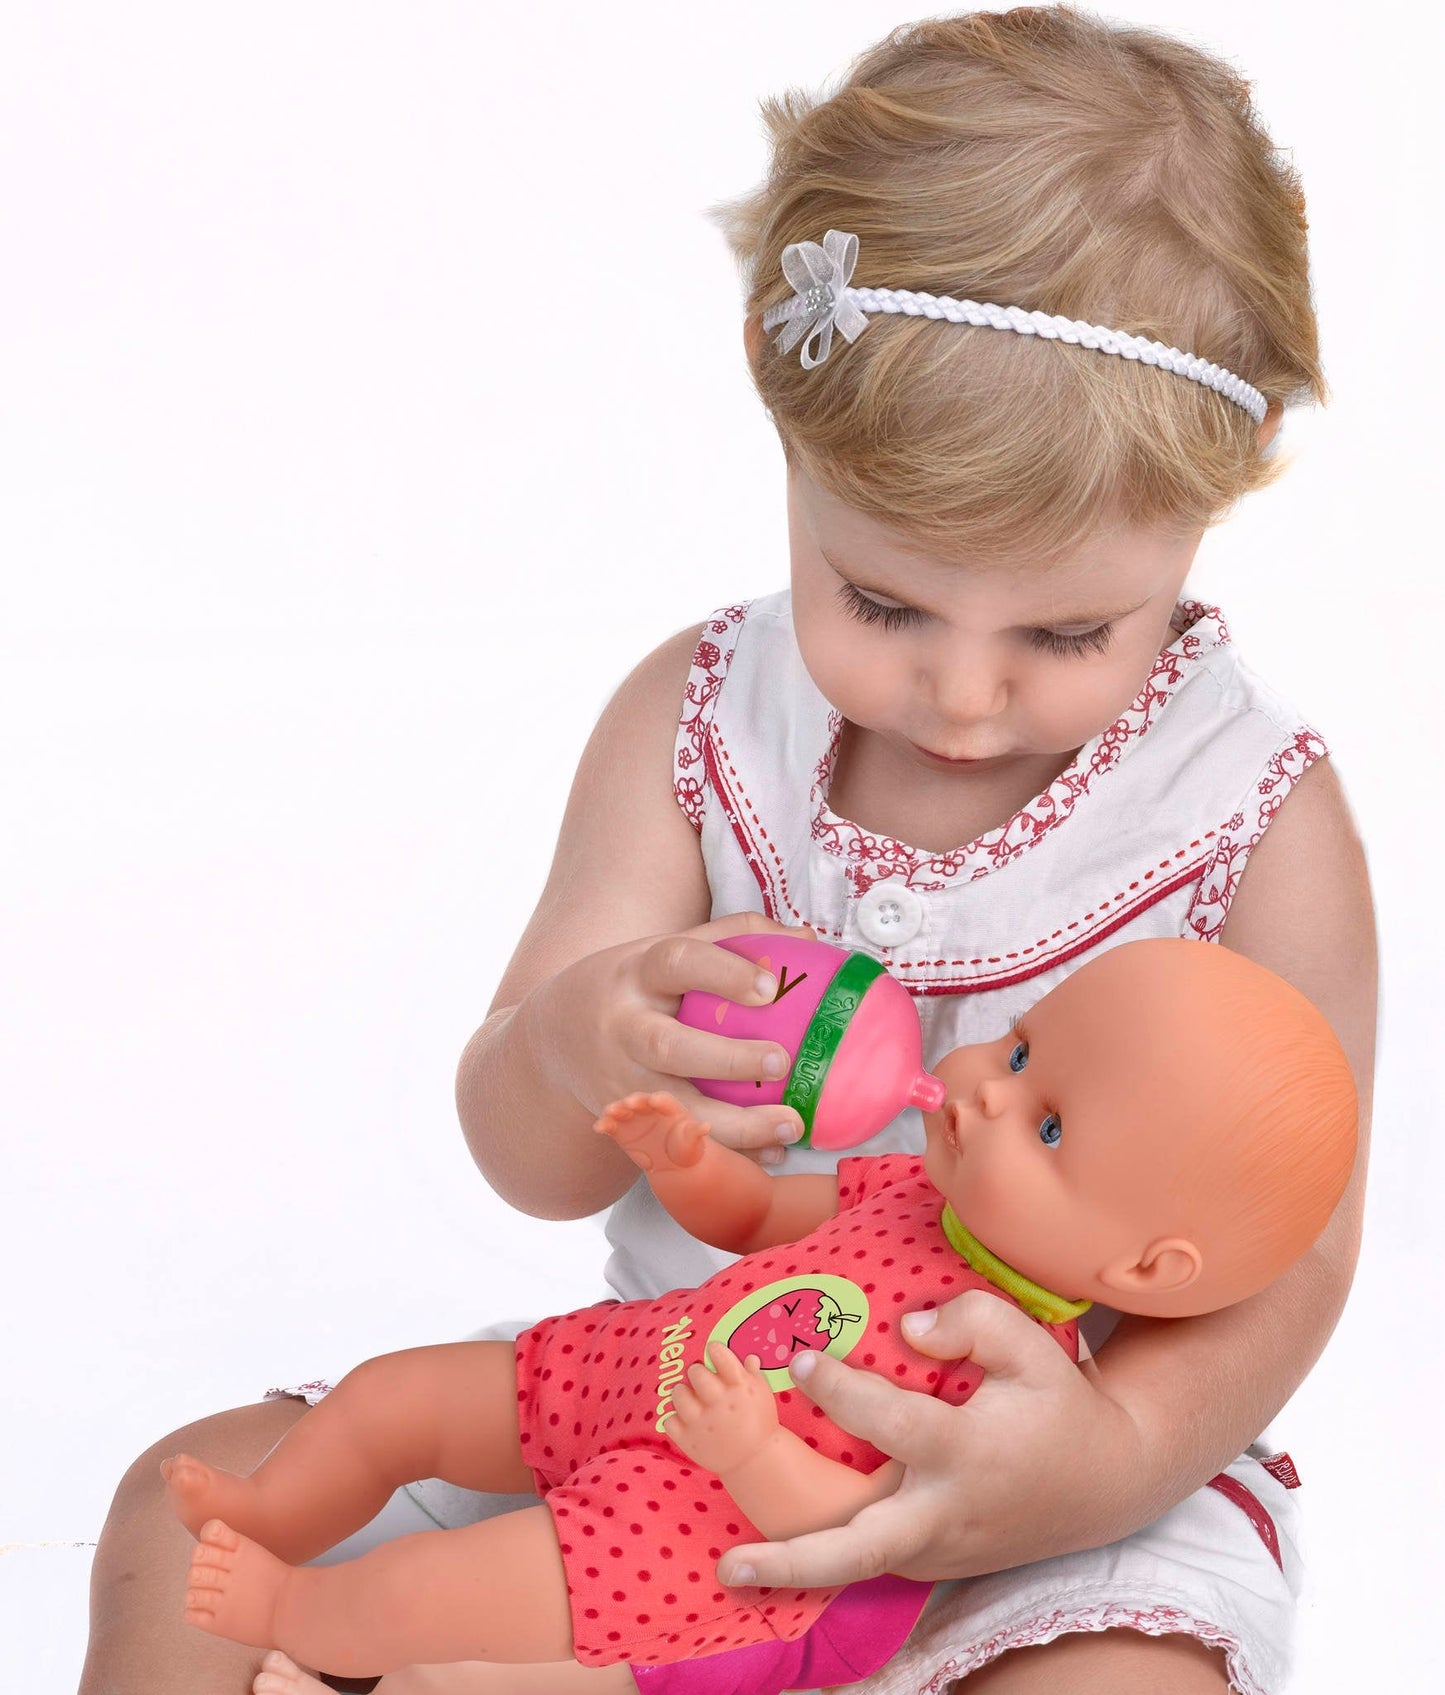 Nenuco Soft Baby Doll with Rattle Bottle